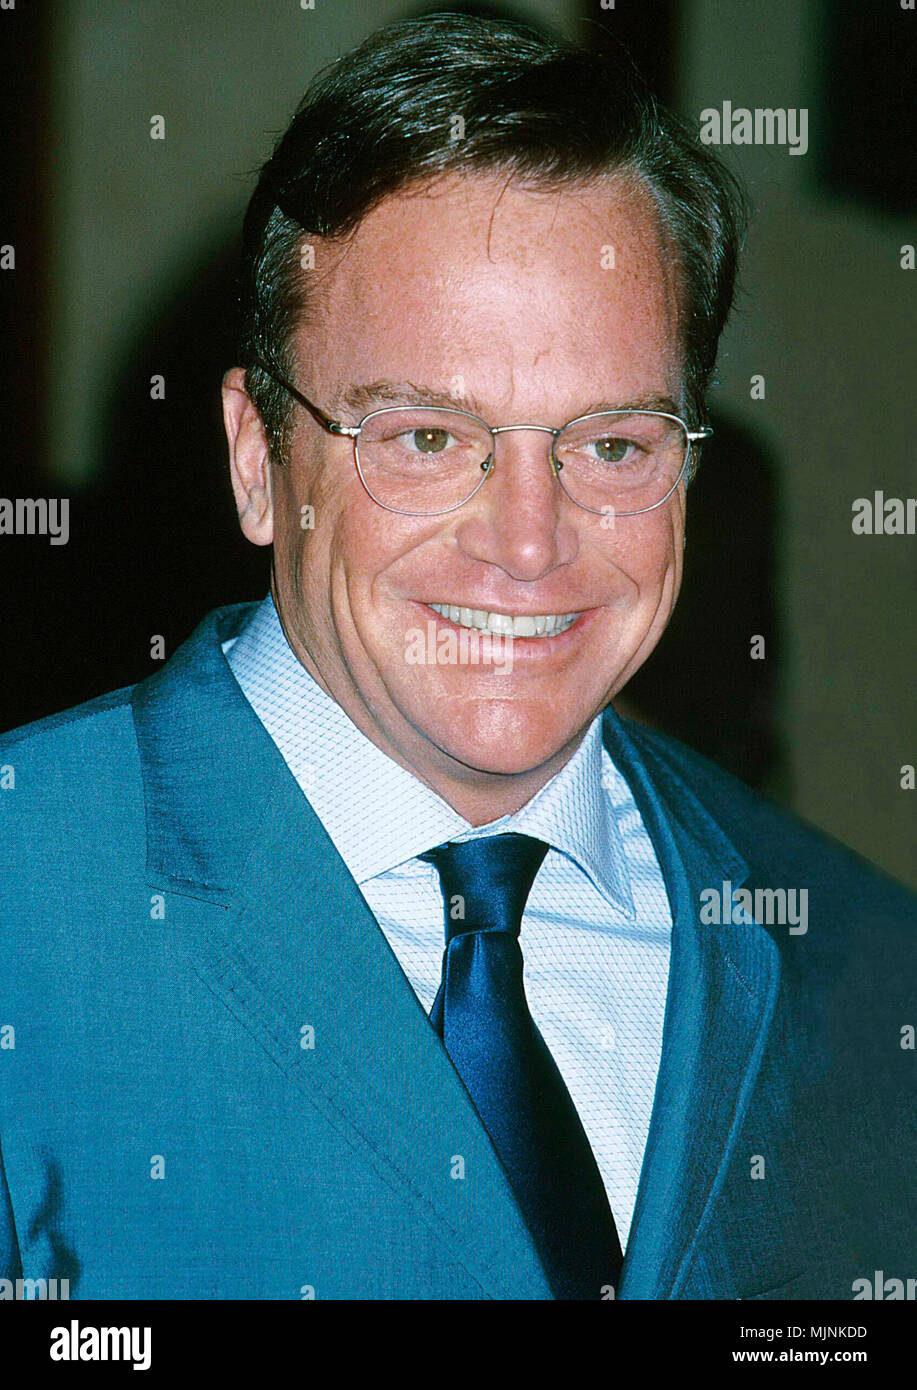 28 Apr 2000, Los Angeles, California, USA --- Original caption: Seventh Annual Race to erase MS. Celebrities Dustin Hoffman, Sylvester Stallone, (Natalie Cole), Christian Slater, Wyclef Jean, Sidney Poitier, at Century Plaza, Century City. The 7th race to ease MS presented by Tommy Hilfiger and VH 1. Gala dinner benefiting the Nancy Davis Foundation for Multiple Sclerosis. The event honors also Montel Williams, who will received the 1st ever award. [?] --- ' Tsuni / - 'Tom Arnold  238 Tom Arnold  238 one person, Vertical, Best of, Hollywood Life, Event in Hollywood Life - California,  Red Carp Stock Photo